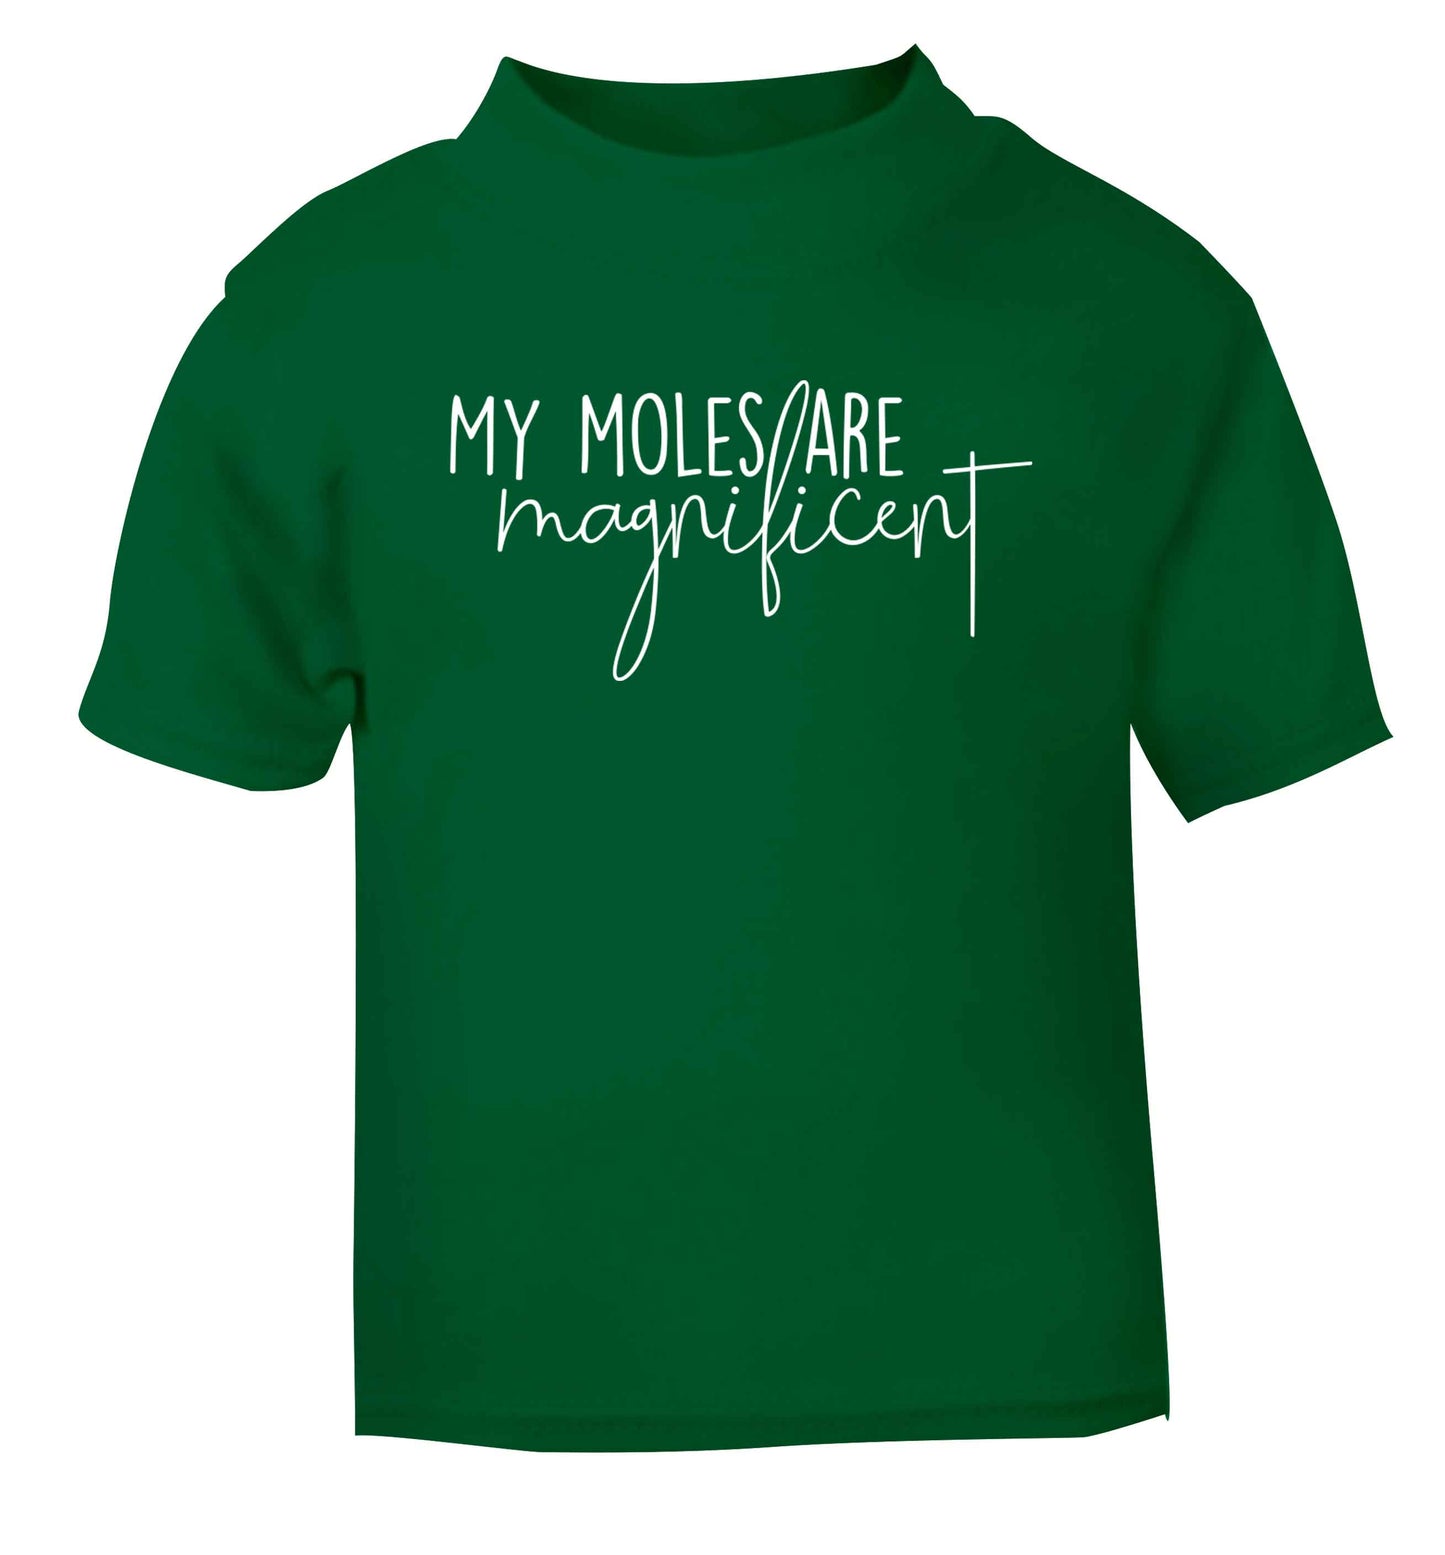 My moles are magnificent green baby toddler Tshirt 2 Years